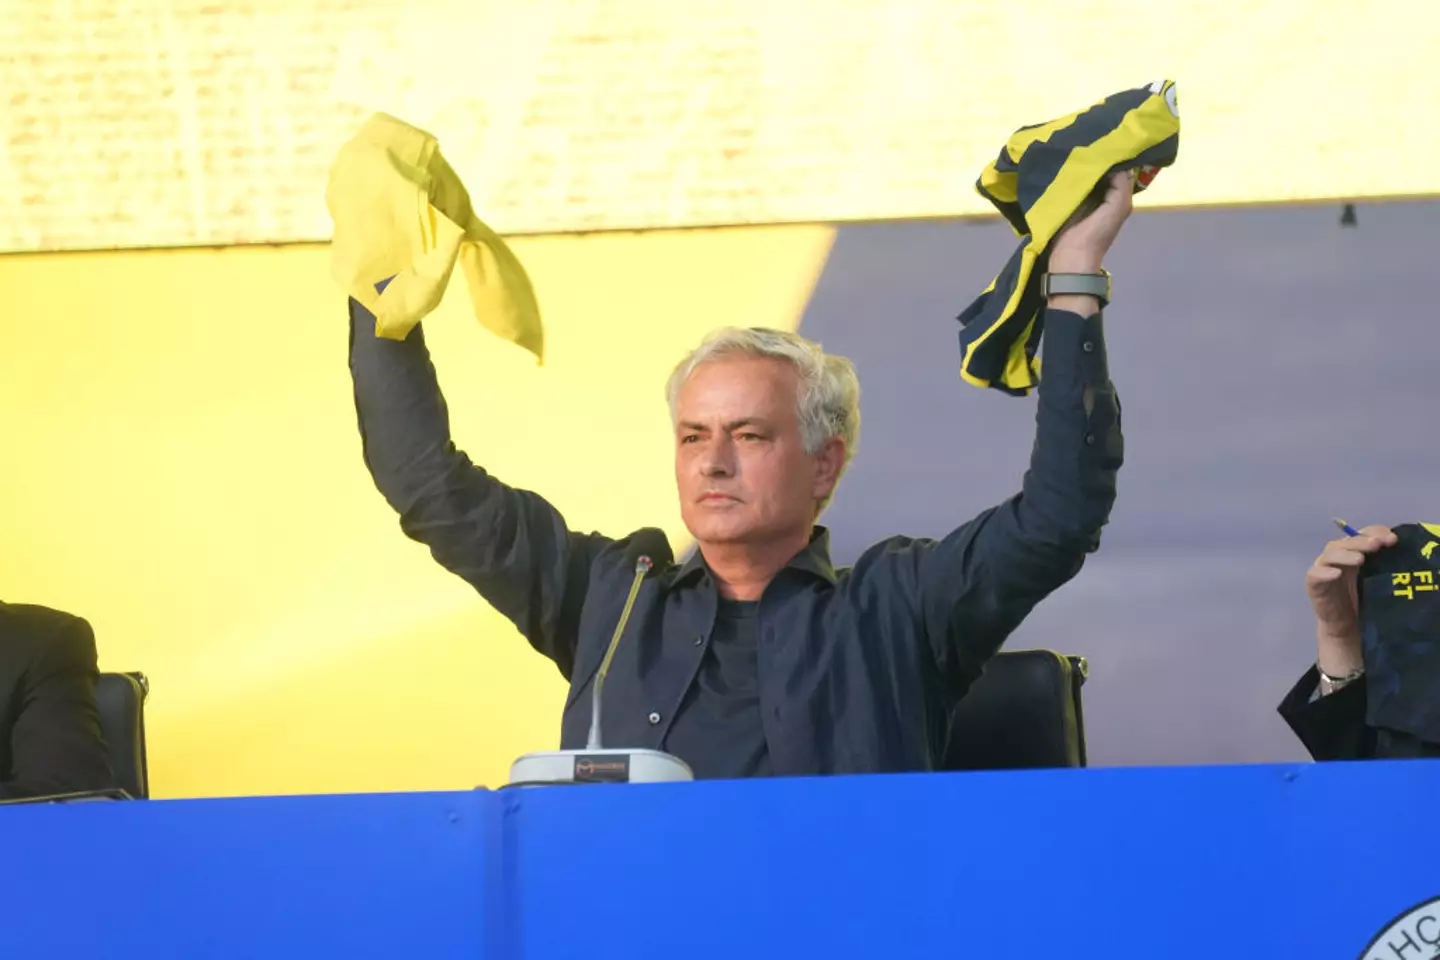 Mourinho has signed a two-year deal with Fenerbahce (Image: Getty)